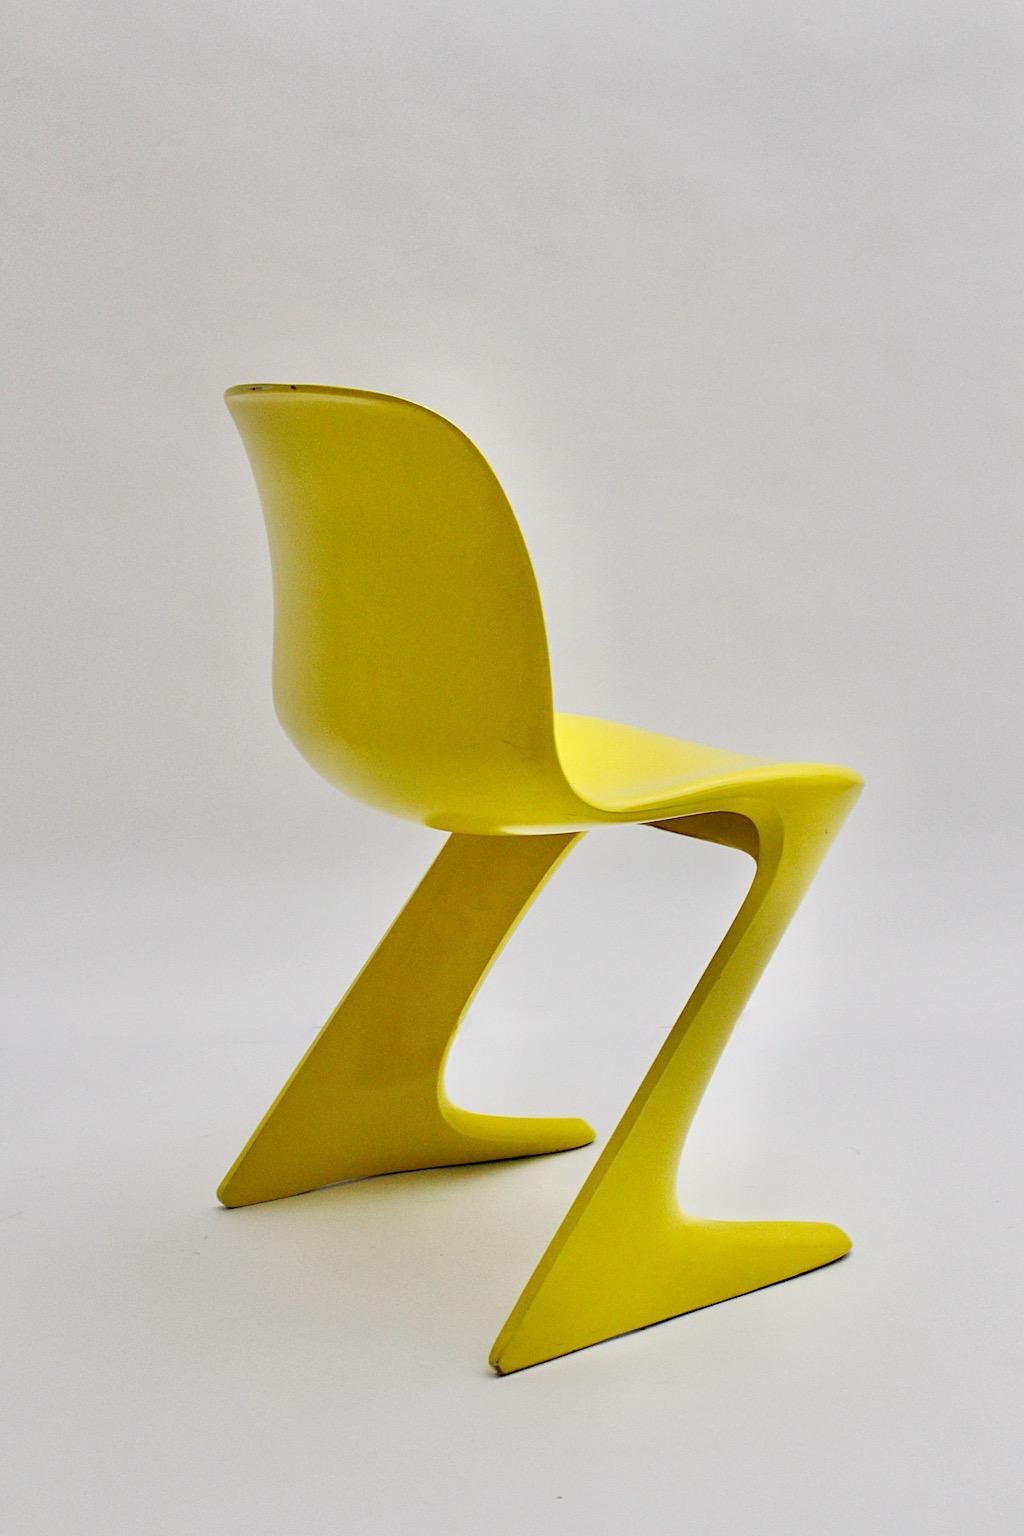 Space Age Vintage Yellow Plastic Chair Kangaroo Chair Ernst Moeckl 1960s Germany In Good Condition For Sale In Vienna, AT